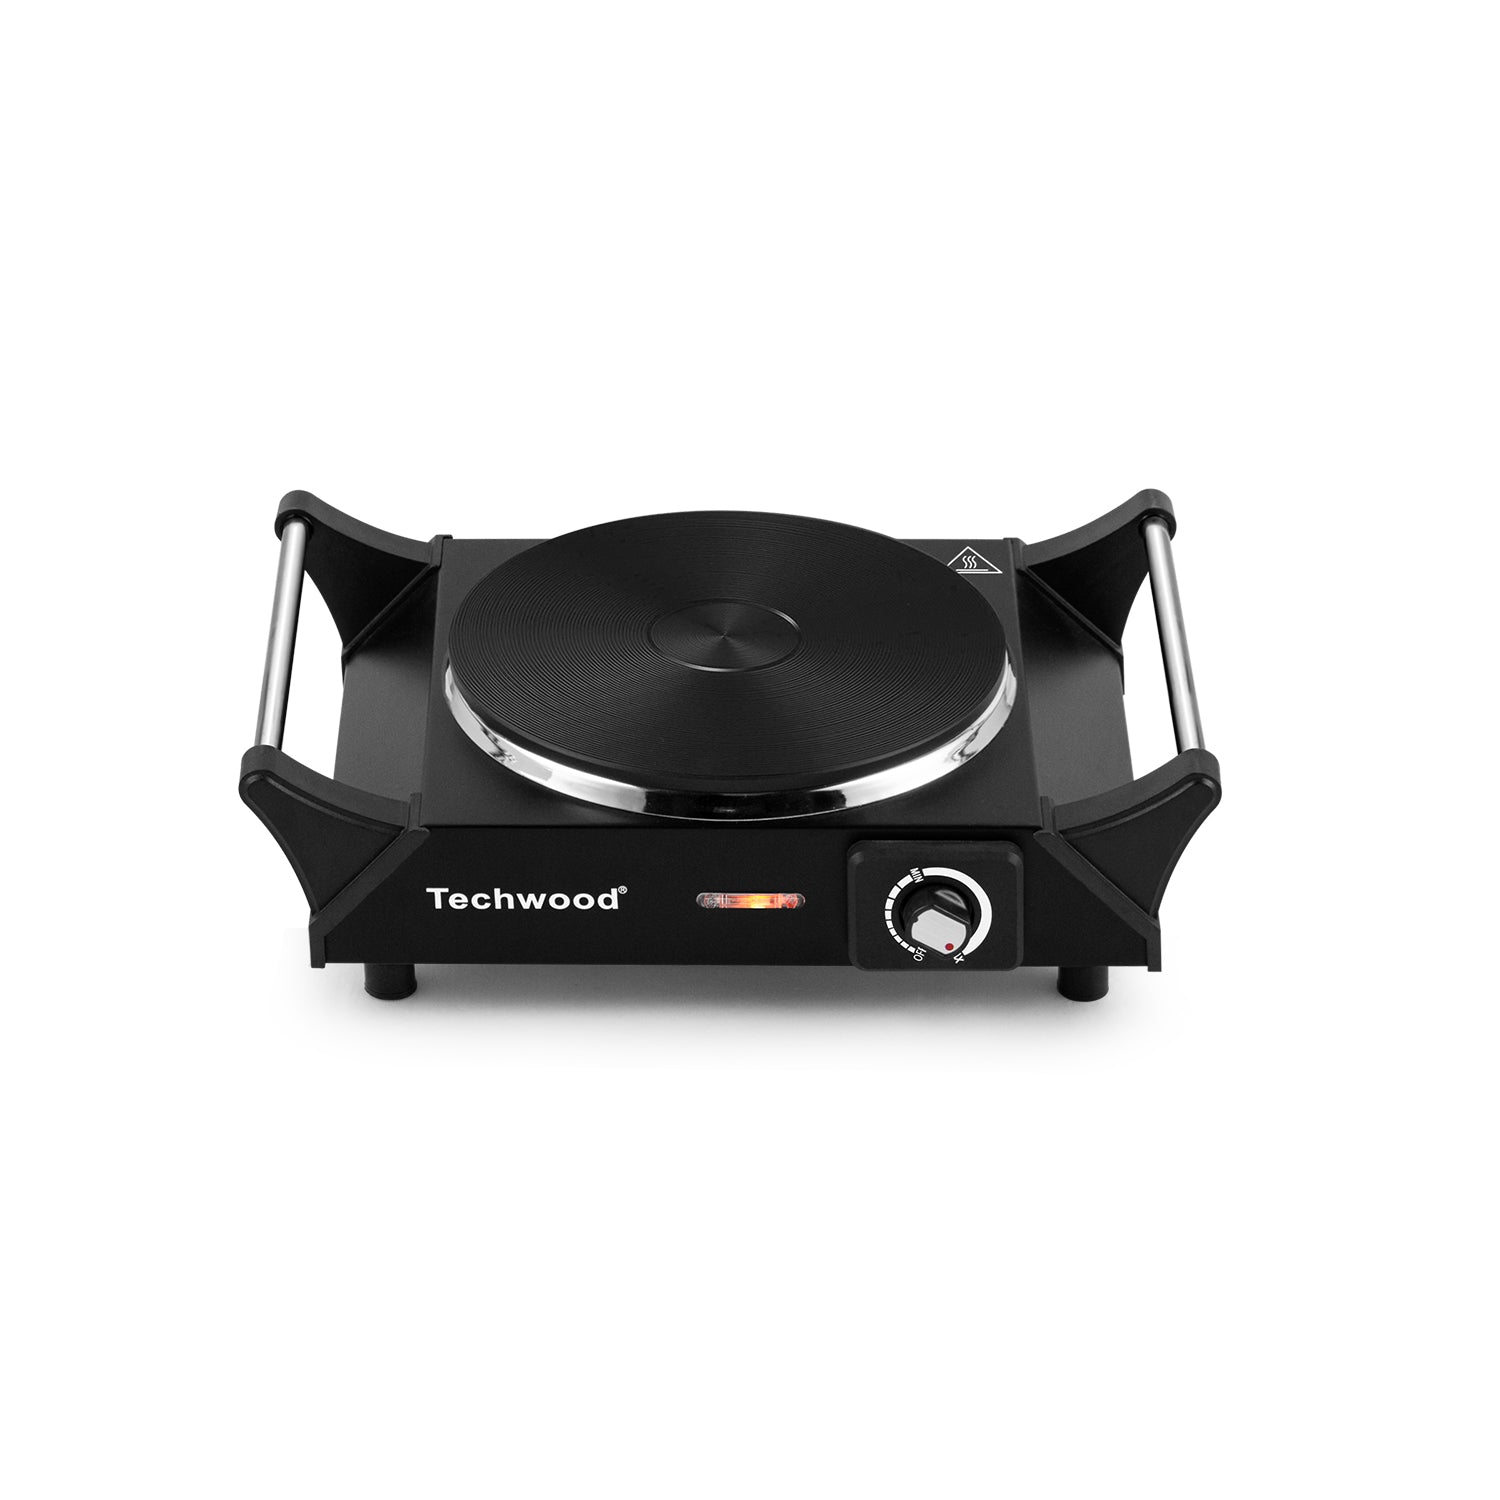 Hot Plate Electric Single Burner 1500W Portable Burner for Cooking with  Adjustable Temperature & Stay Cool Handles, Stainless Steel Easy To Clean